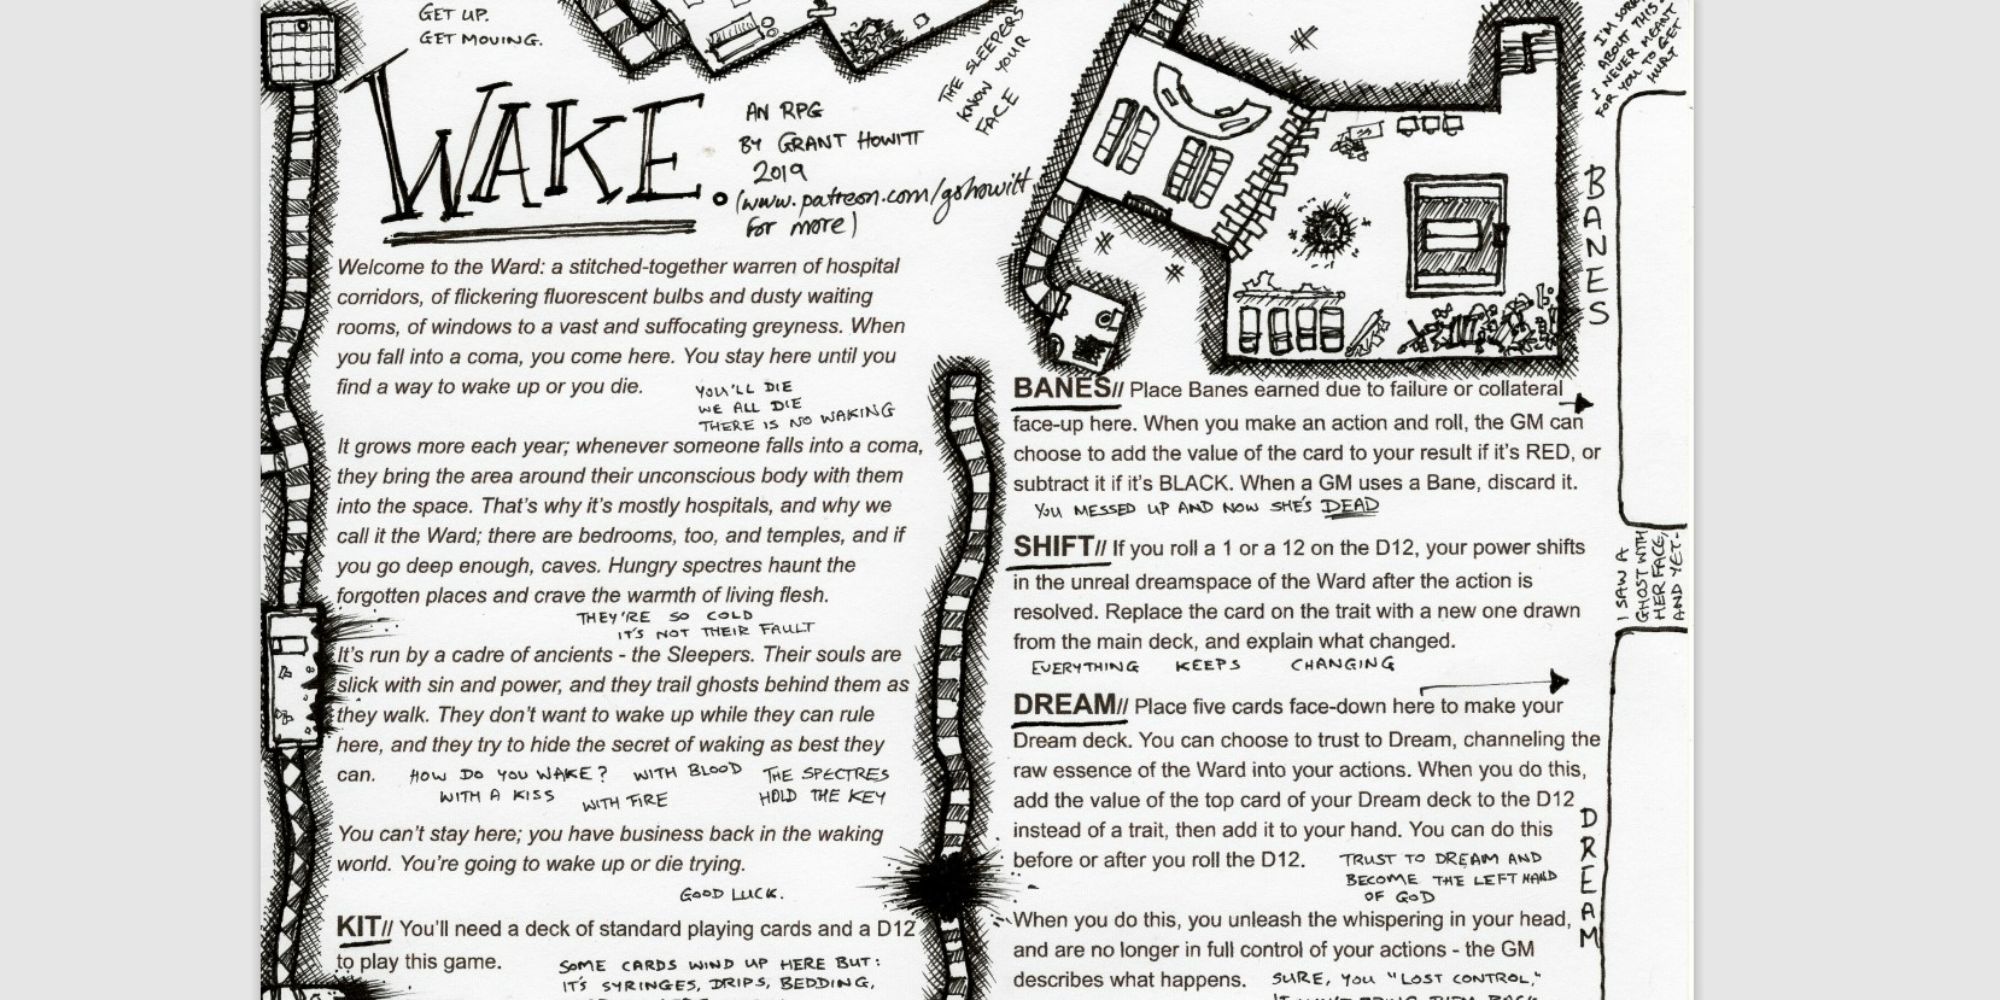 Wake one-page RPG with doodles of the Ward